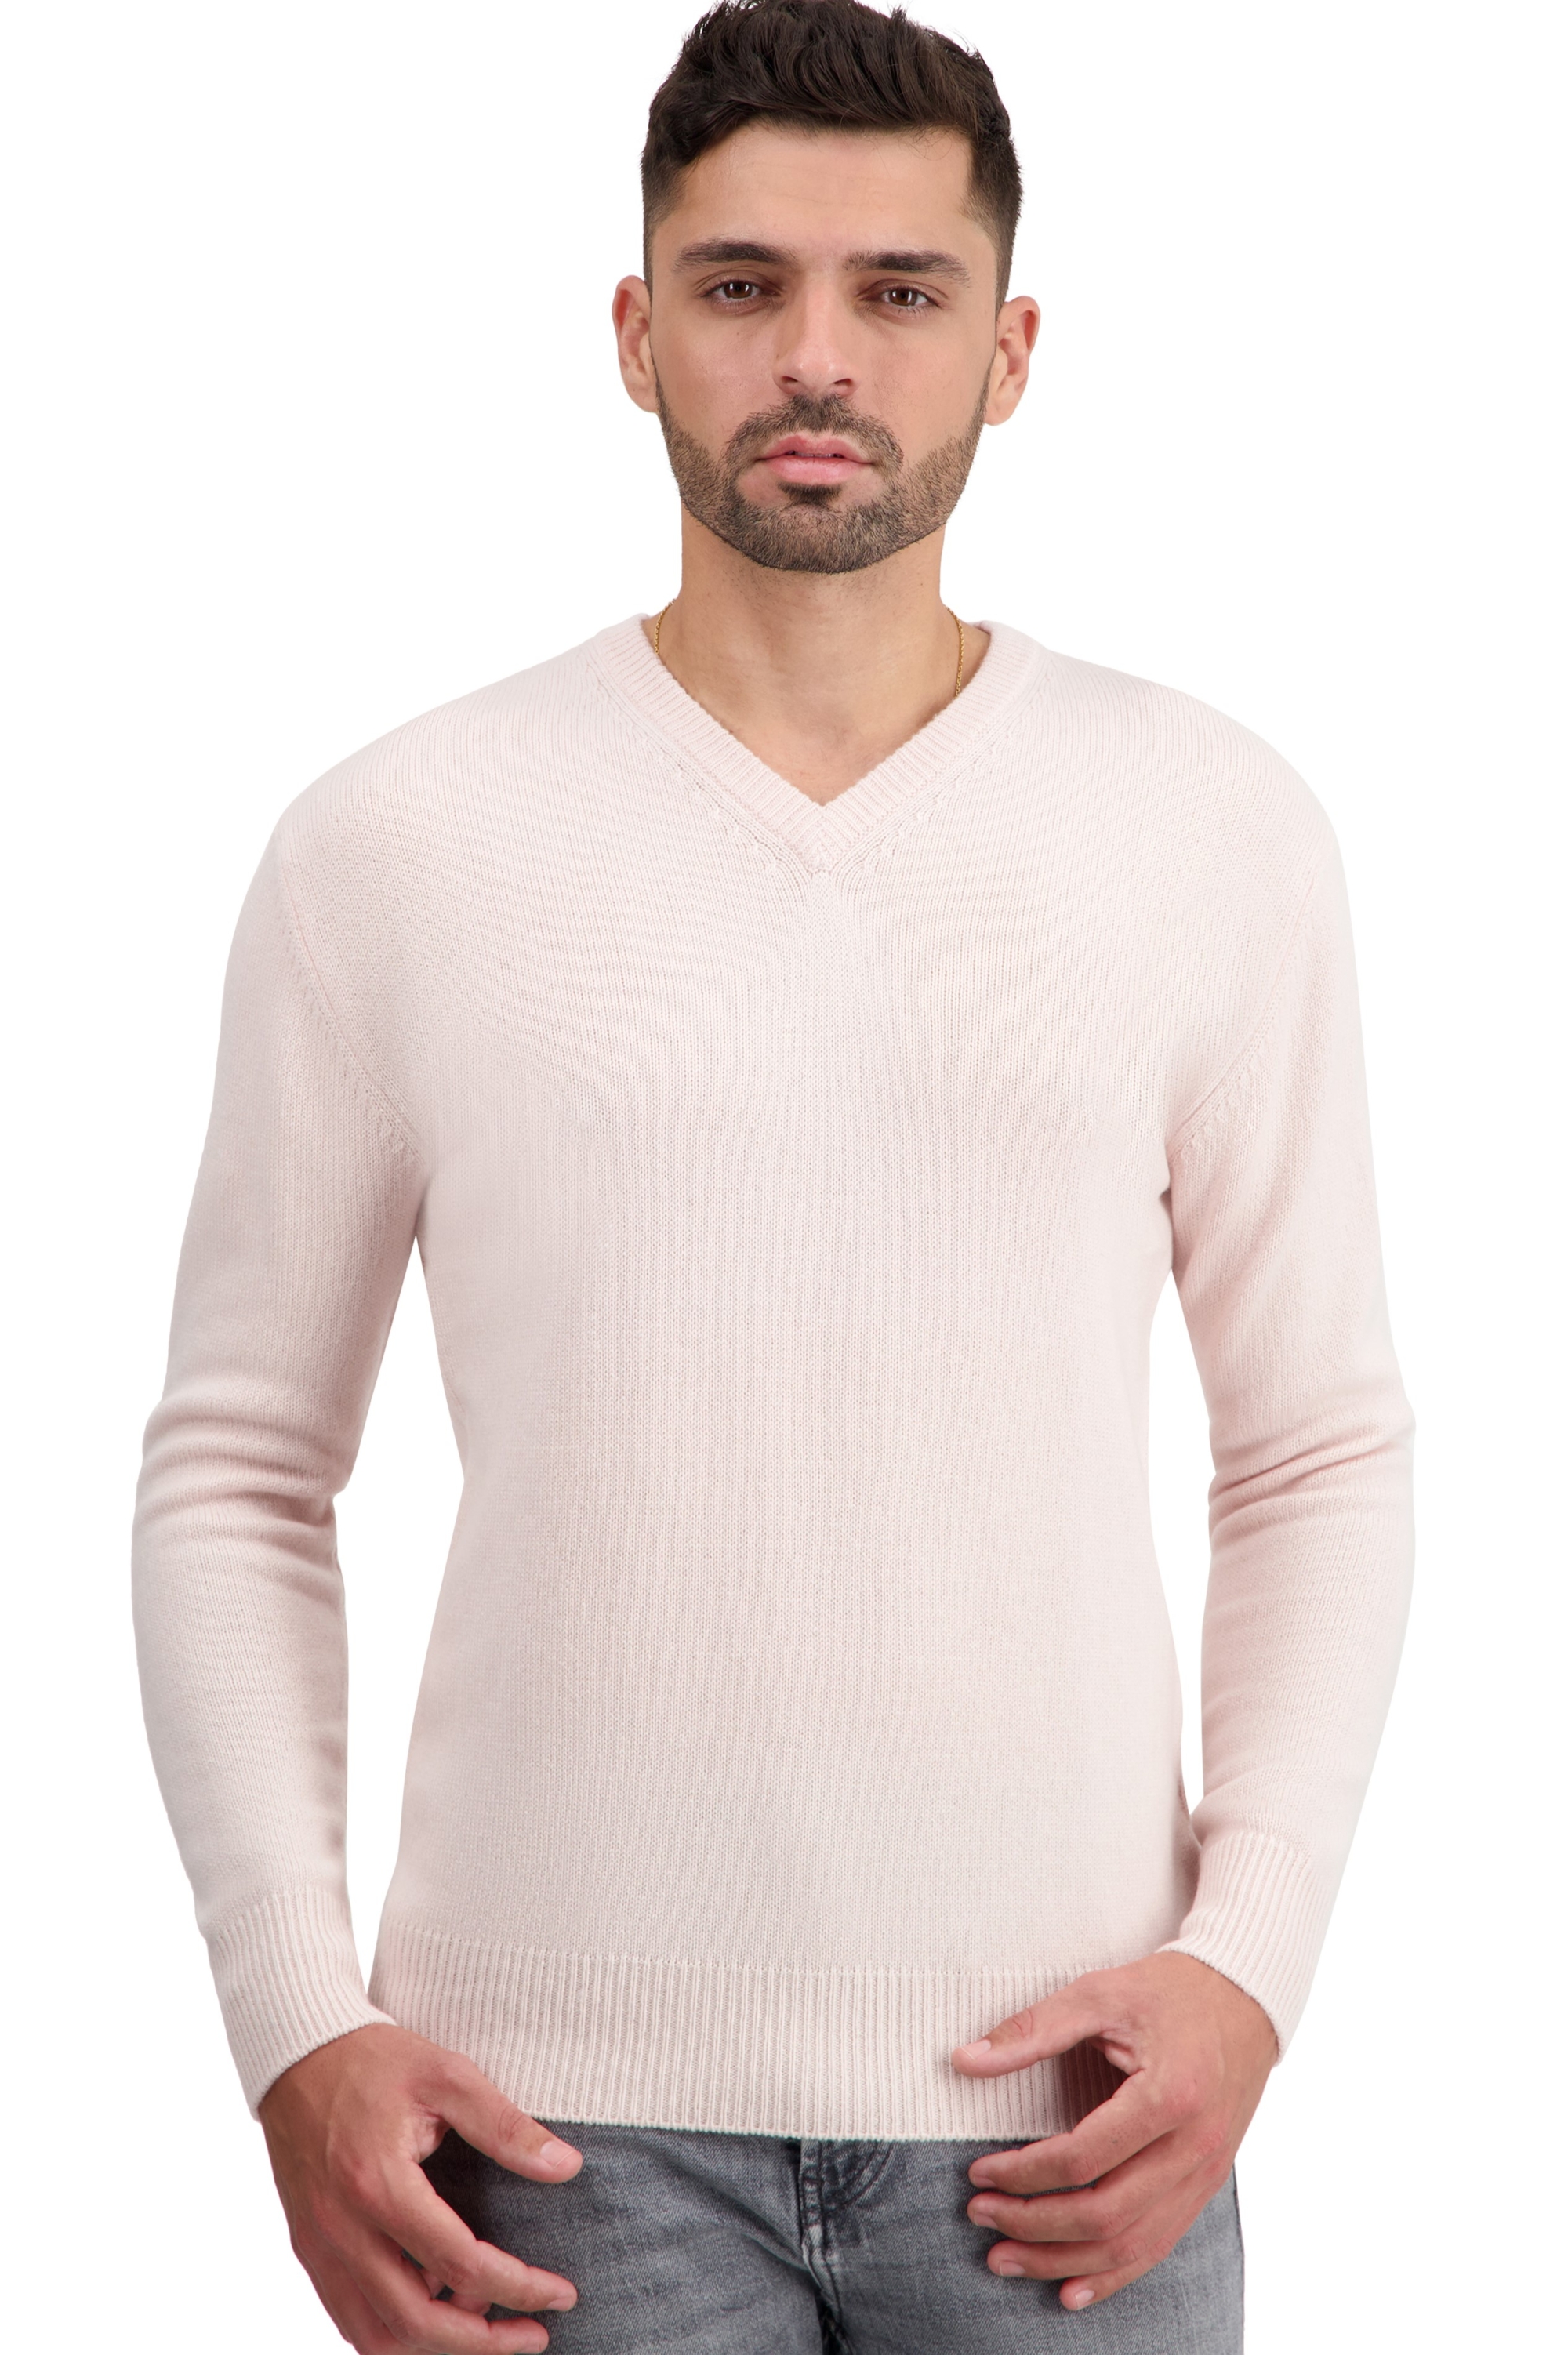 Cachemire pull homme col v tour first mallow 2xl